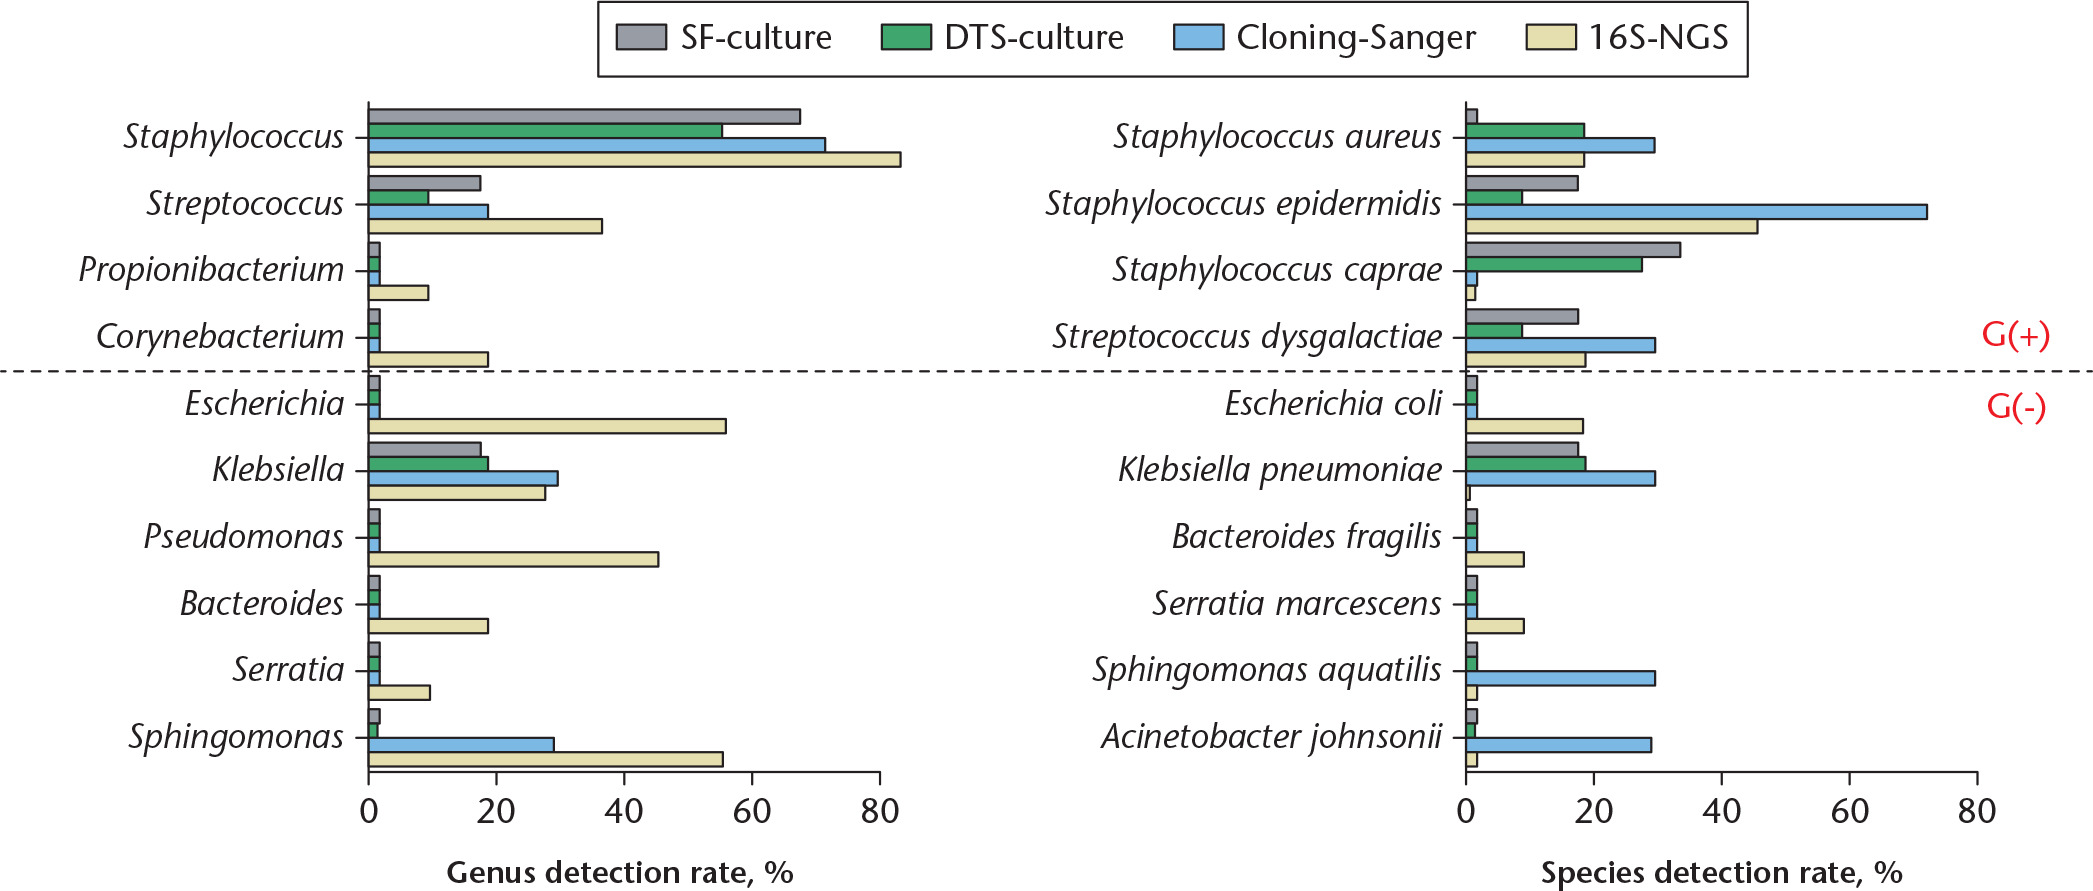 Fig. 3 
            Detection rates by 16S metagenomic analysis, targeted Sanger sequencing, and blood cultures. Data are for ten species and ten genera detected by different methods. G(+), Gram-positive; G(-), Gram-negative; SF-culture, synovial fluid culture on BD BACTEC Plus Aerobic (Becton, Dickinson and Company (BD), Sparks, Maryland); DTS-culture, deep tissue culture; Cloning-Sanger, targeted Sanger sequencing; 16S-NGS, 16S metagenomic analysis-next-generation sequencing.
          